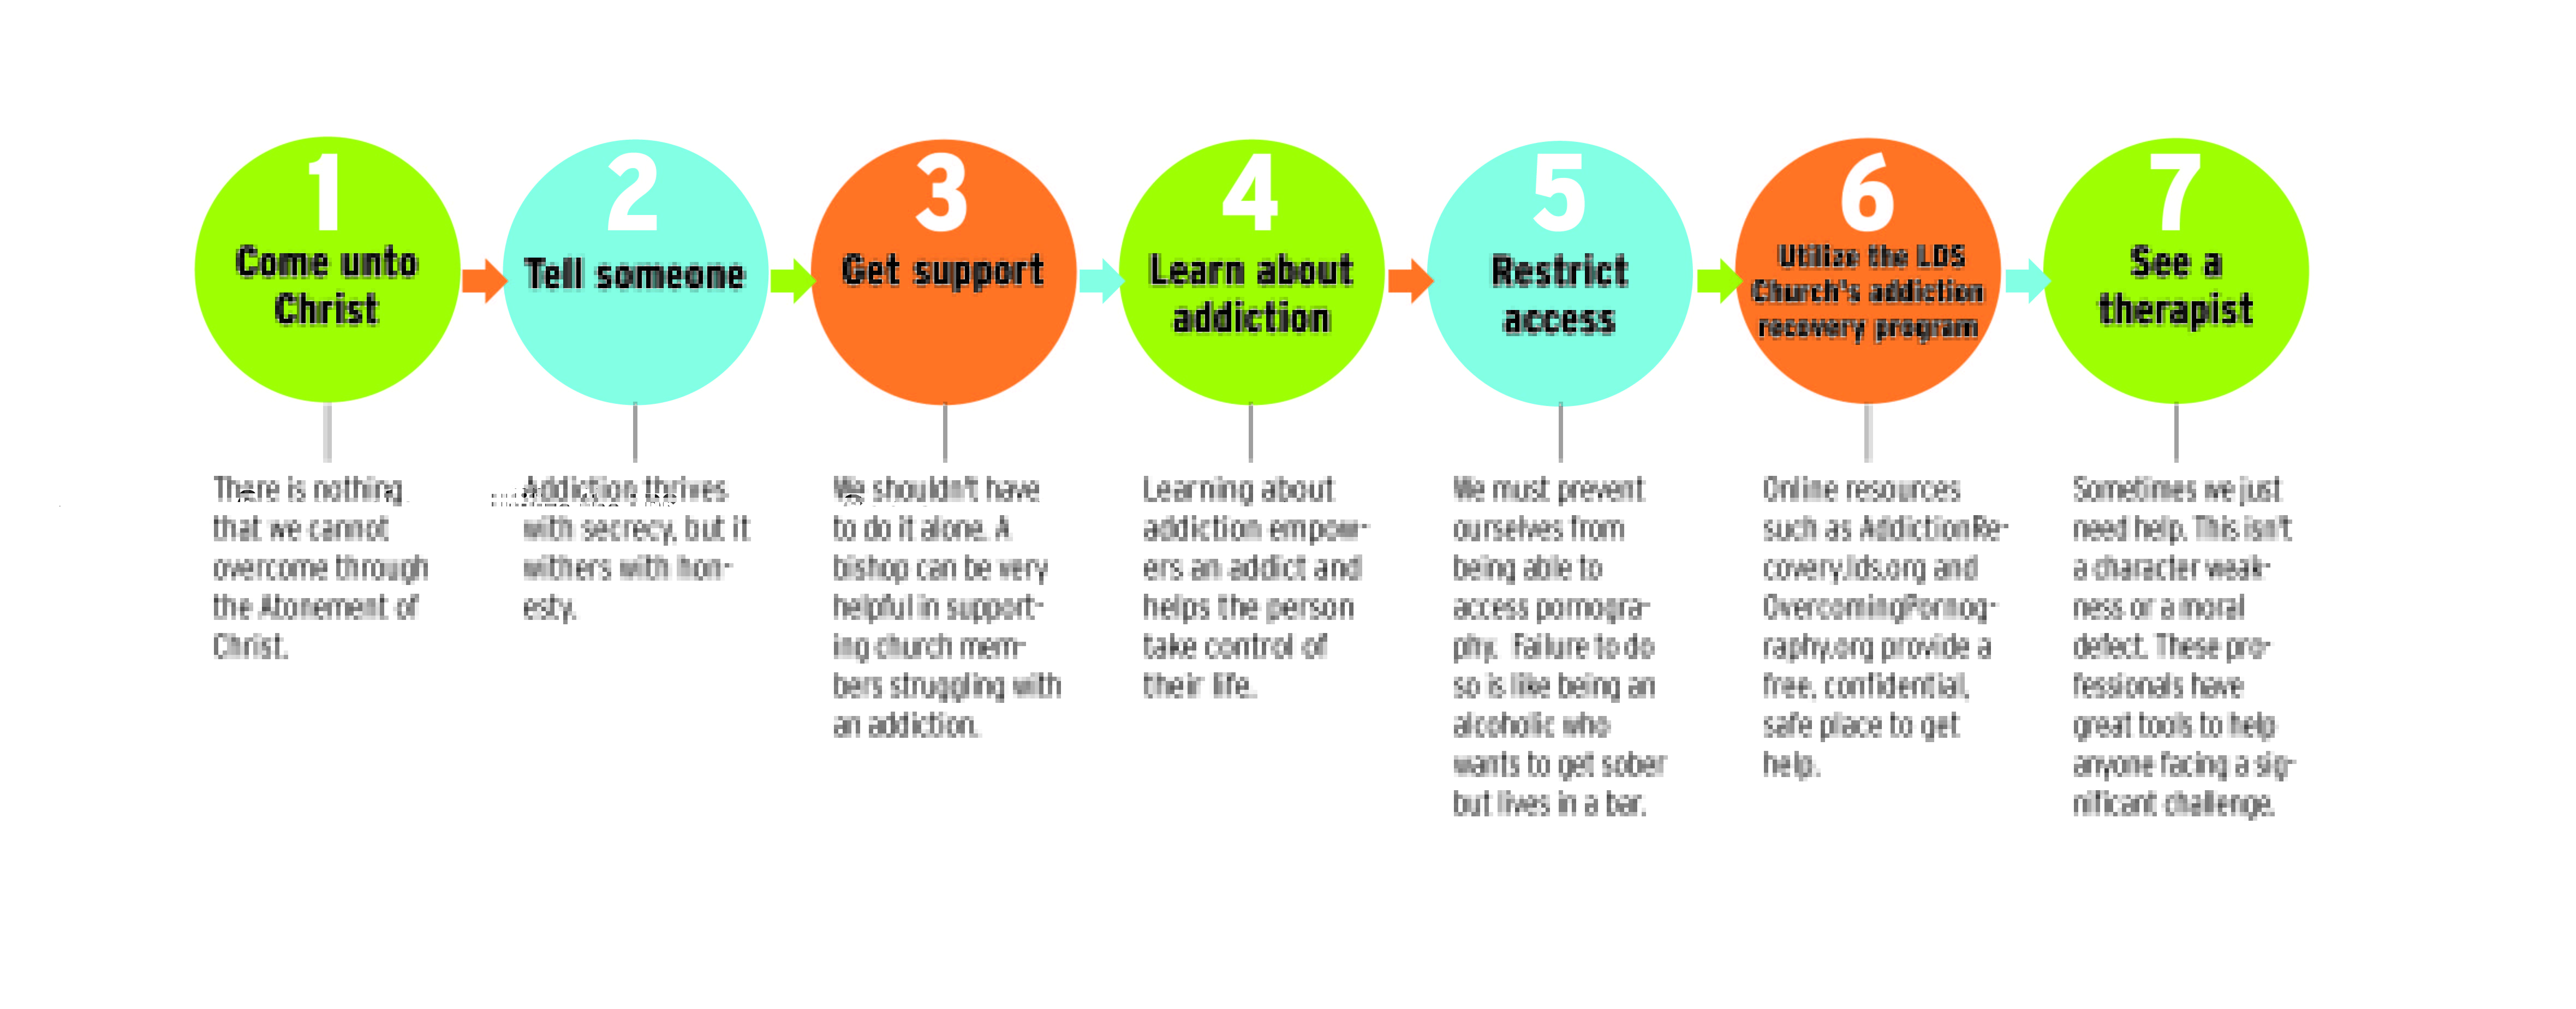 American Fork LDS Family Services Counseling Manager Ben Erwin offers seven steps for overcoming addiction. (Jessica Olsen)